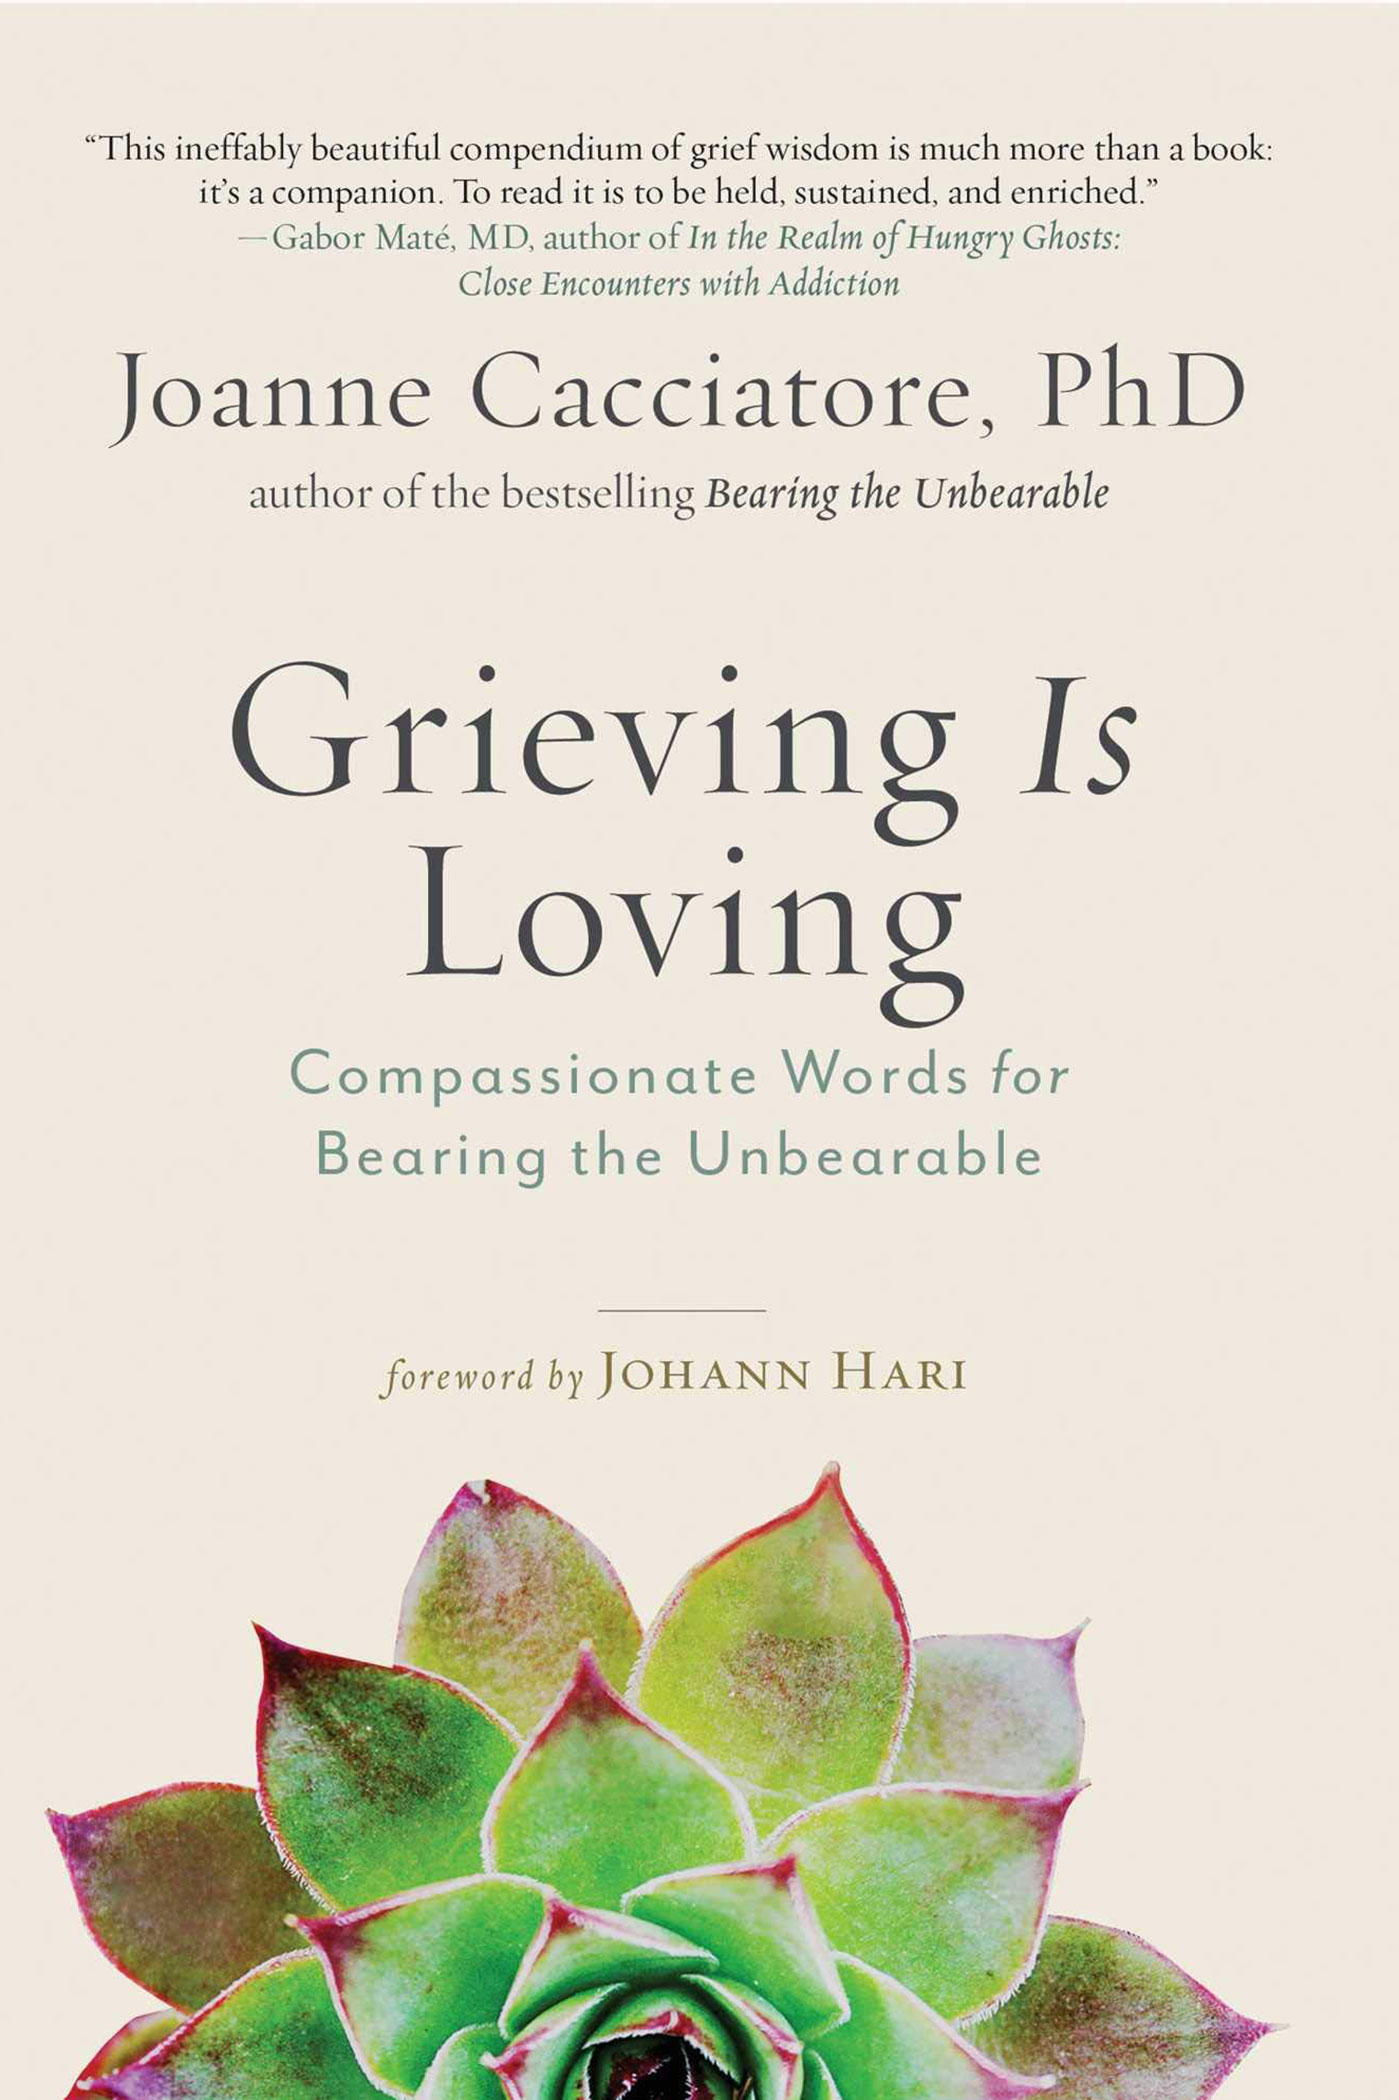 Grieving is Loving book cover